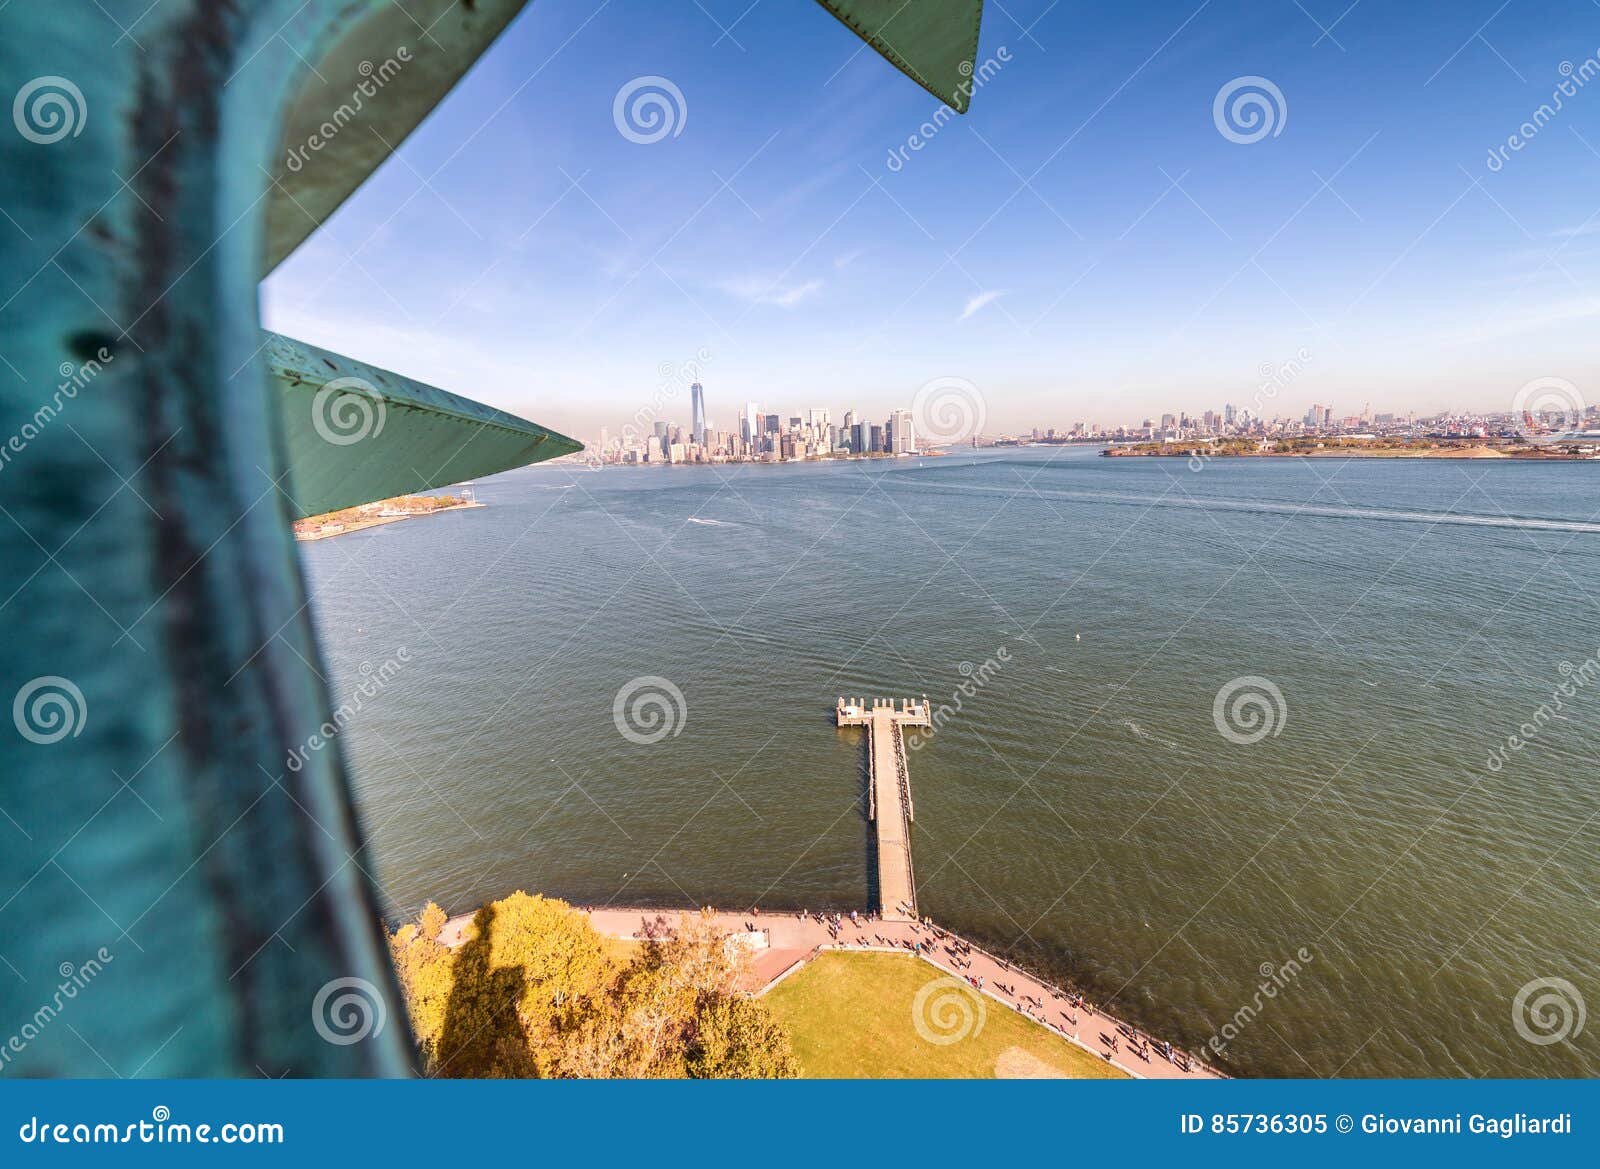 Interior Of Statue Of Liberty Crown New York City Stock